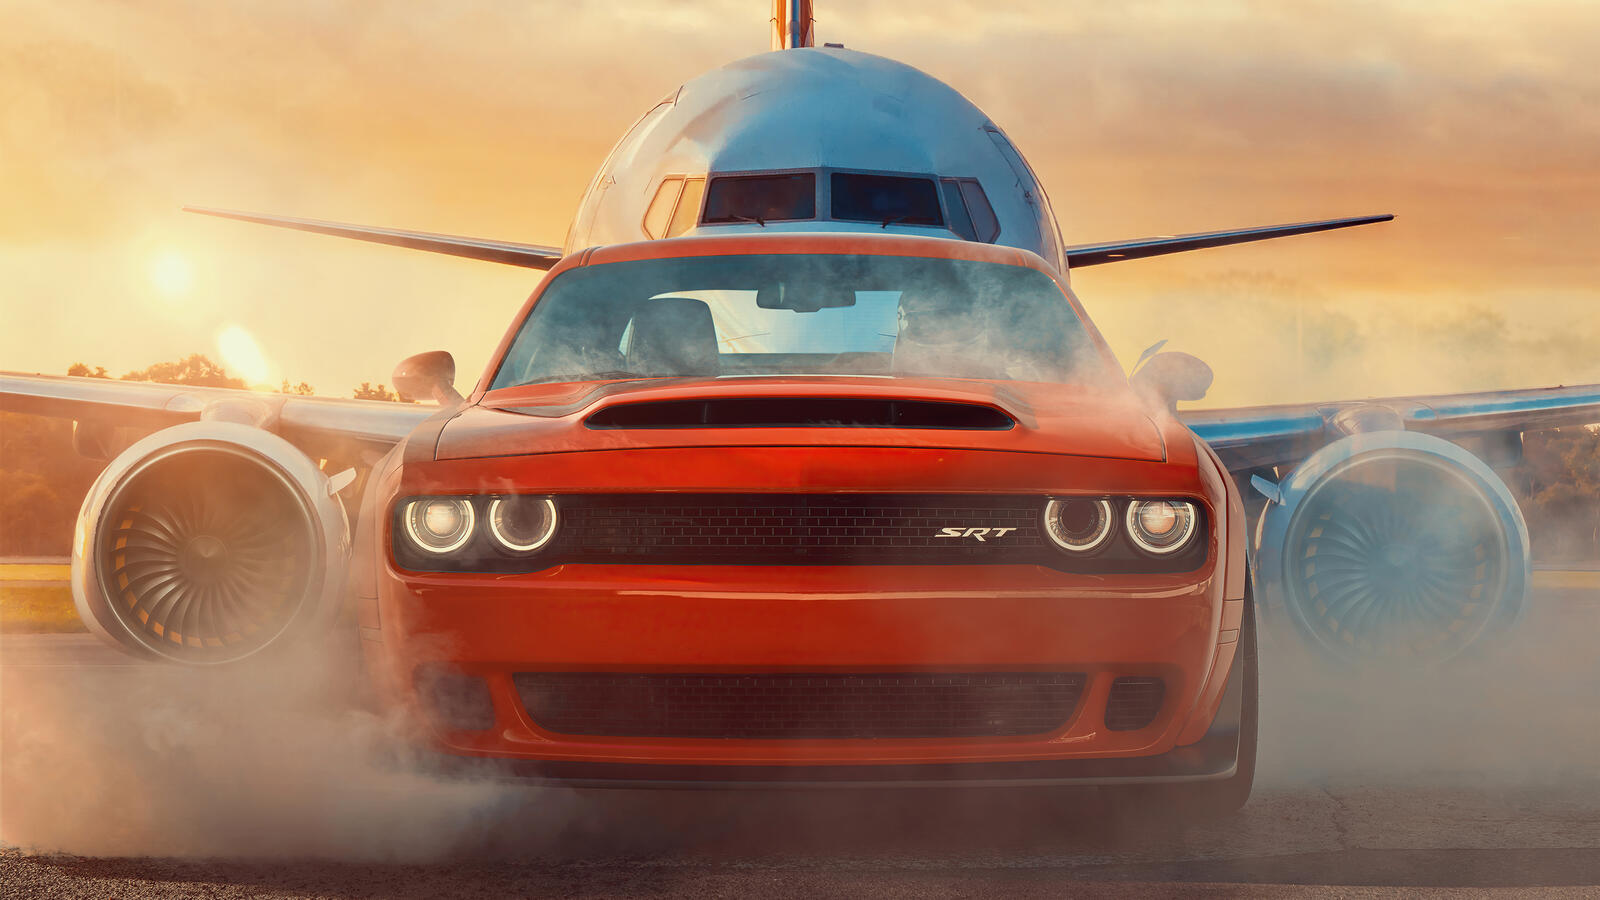 Wallpapers airplane Dodge Challenger view from front on the desktop